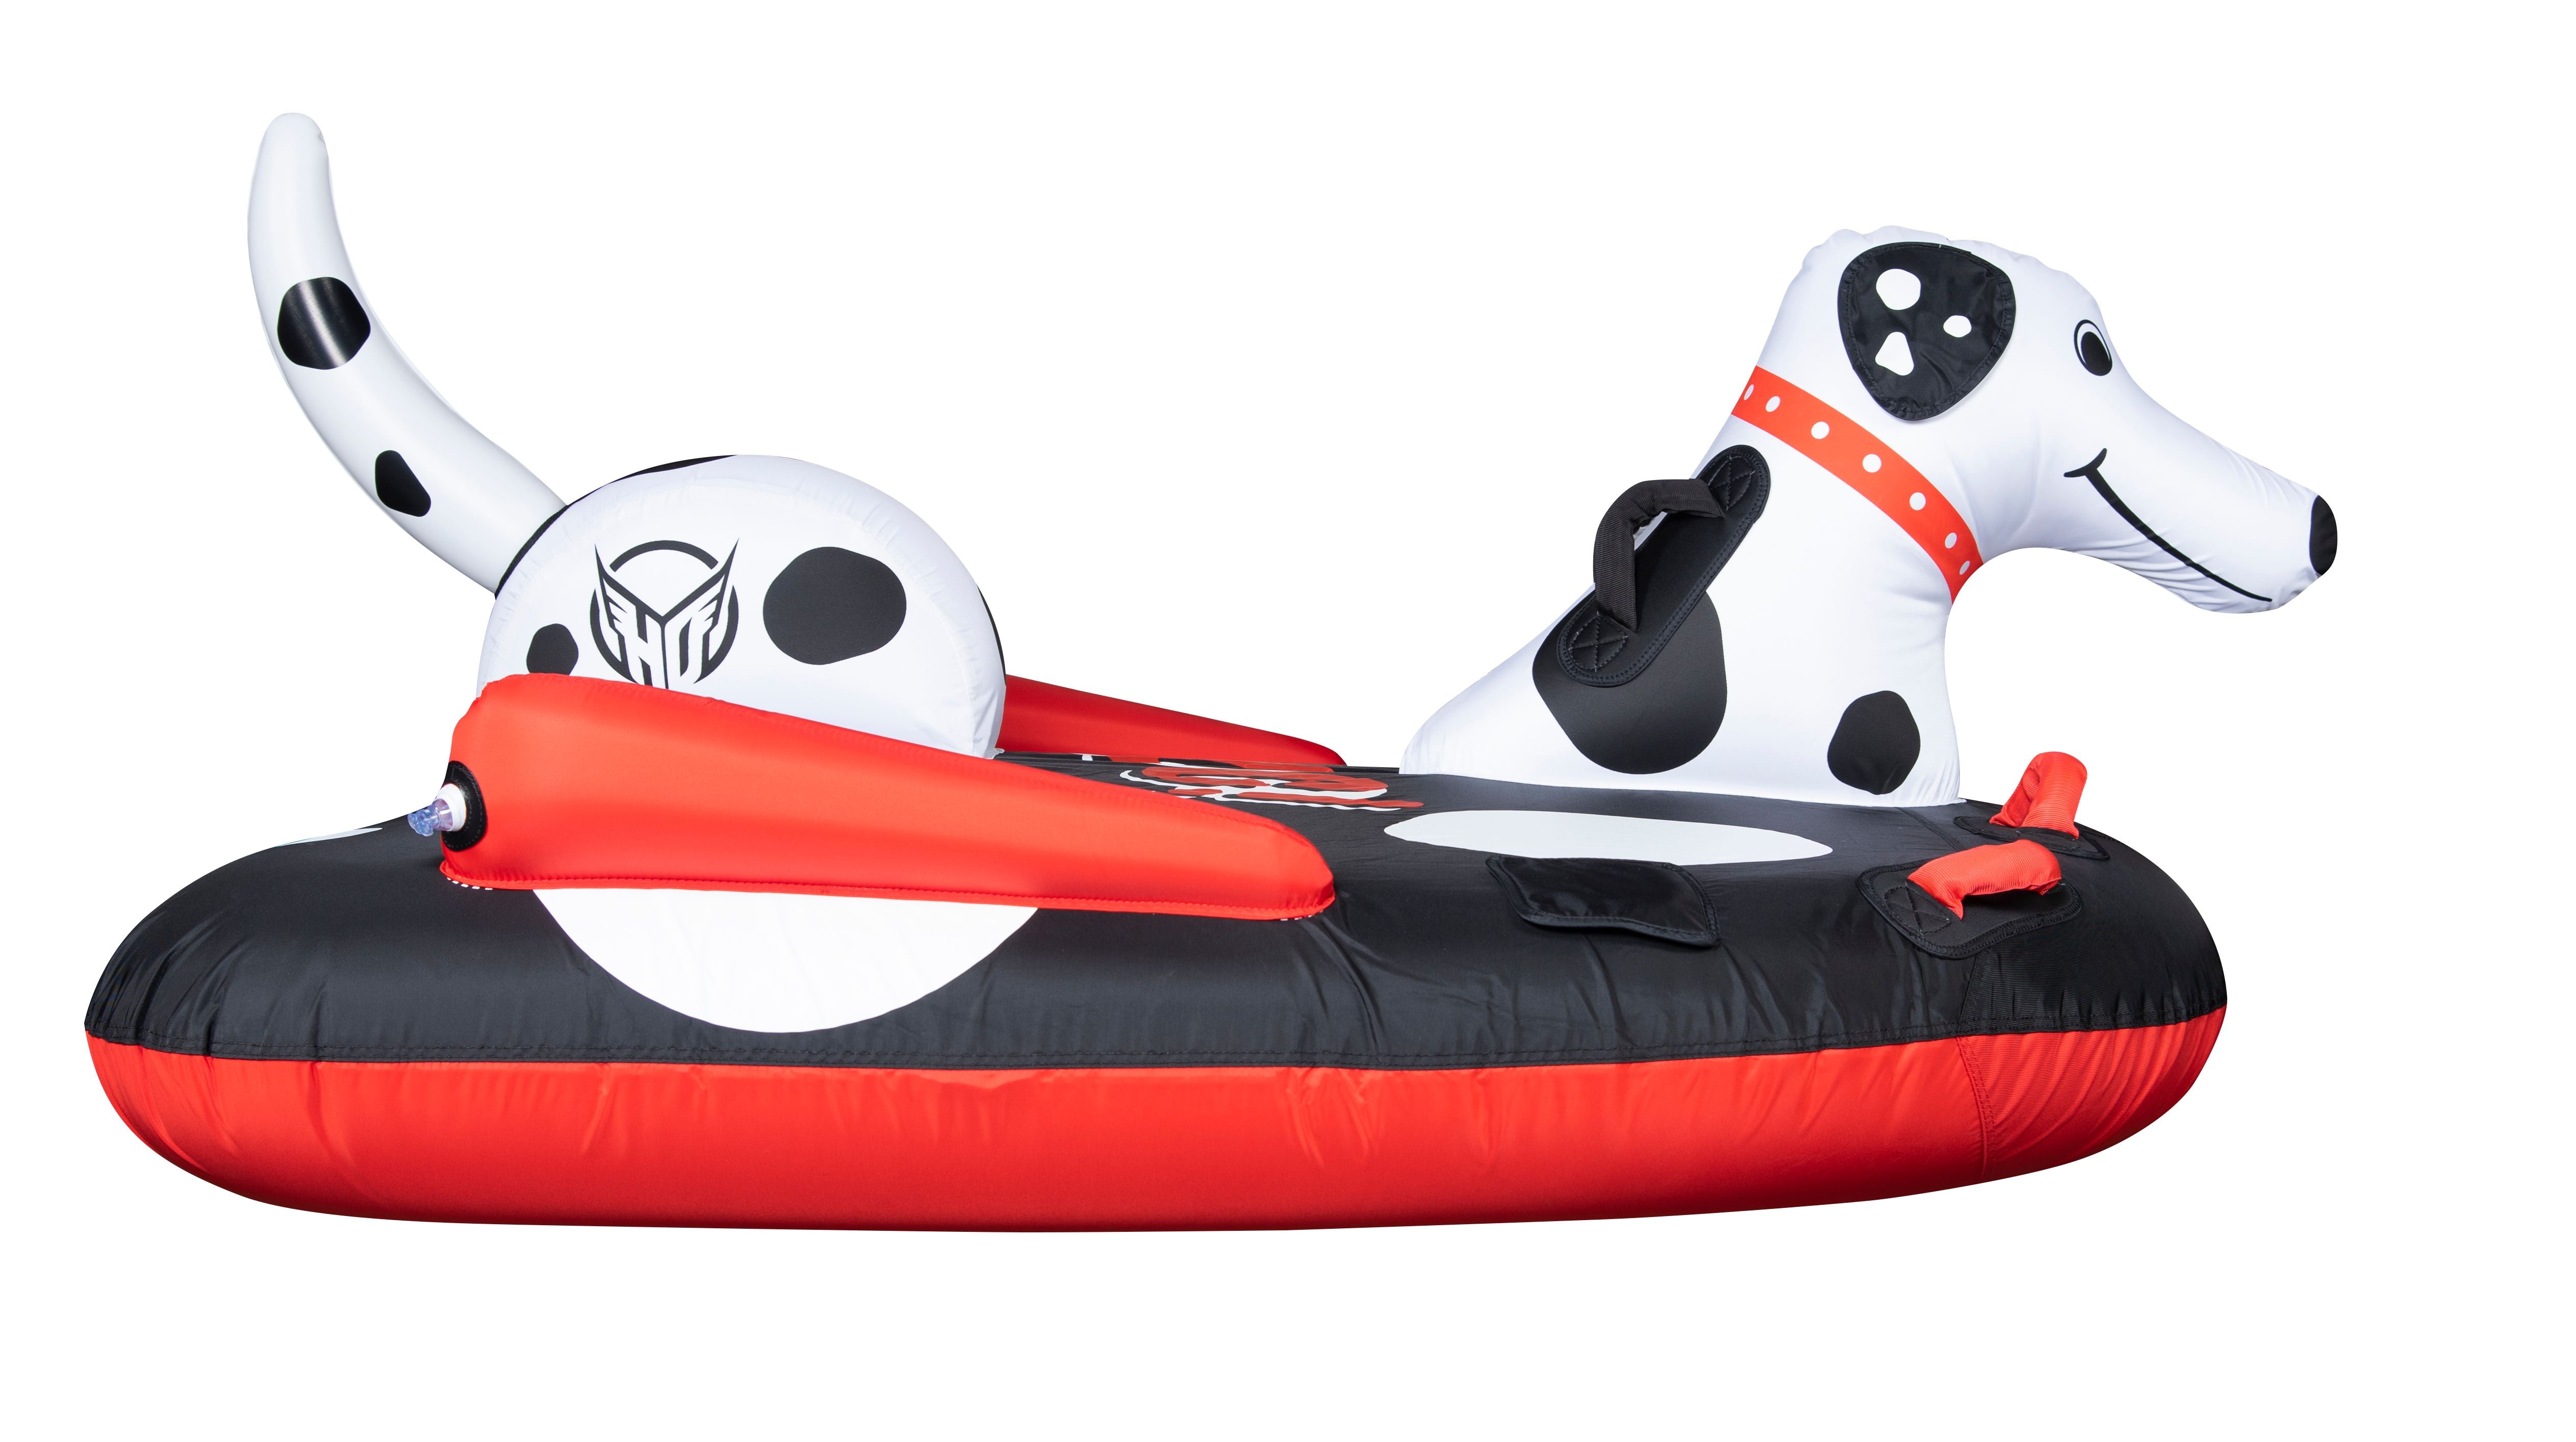 HO Sports Dog Tube - 1, 2 or 3 Person Towable Boat Tube